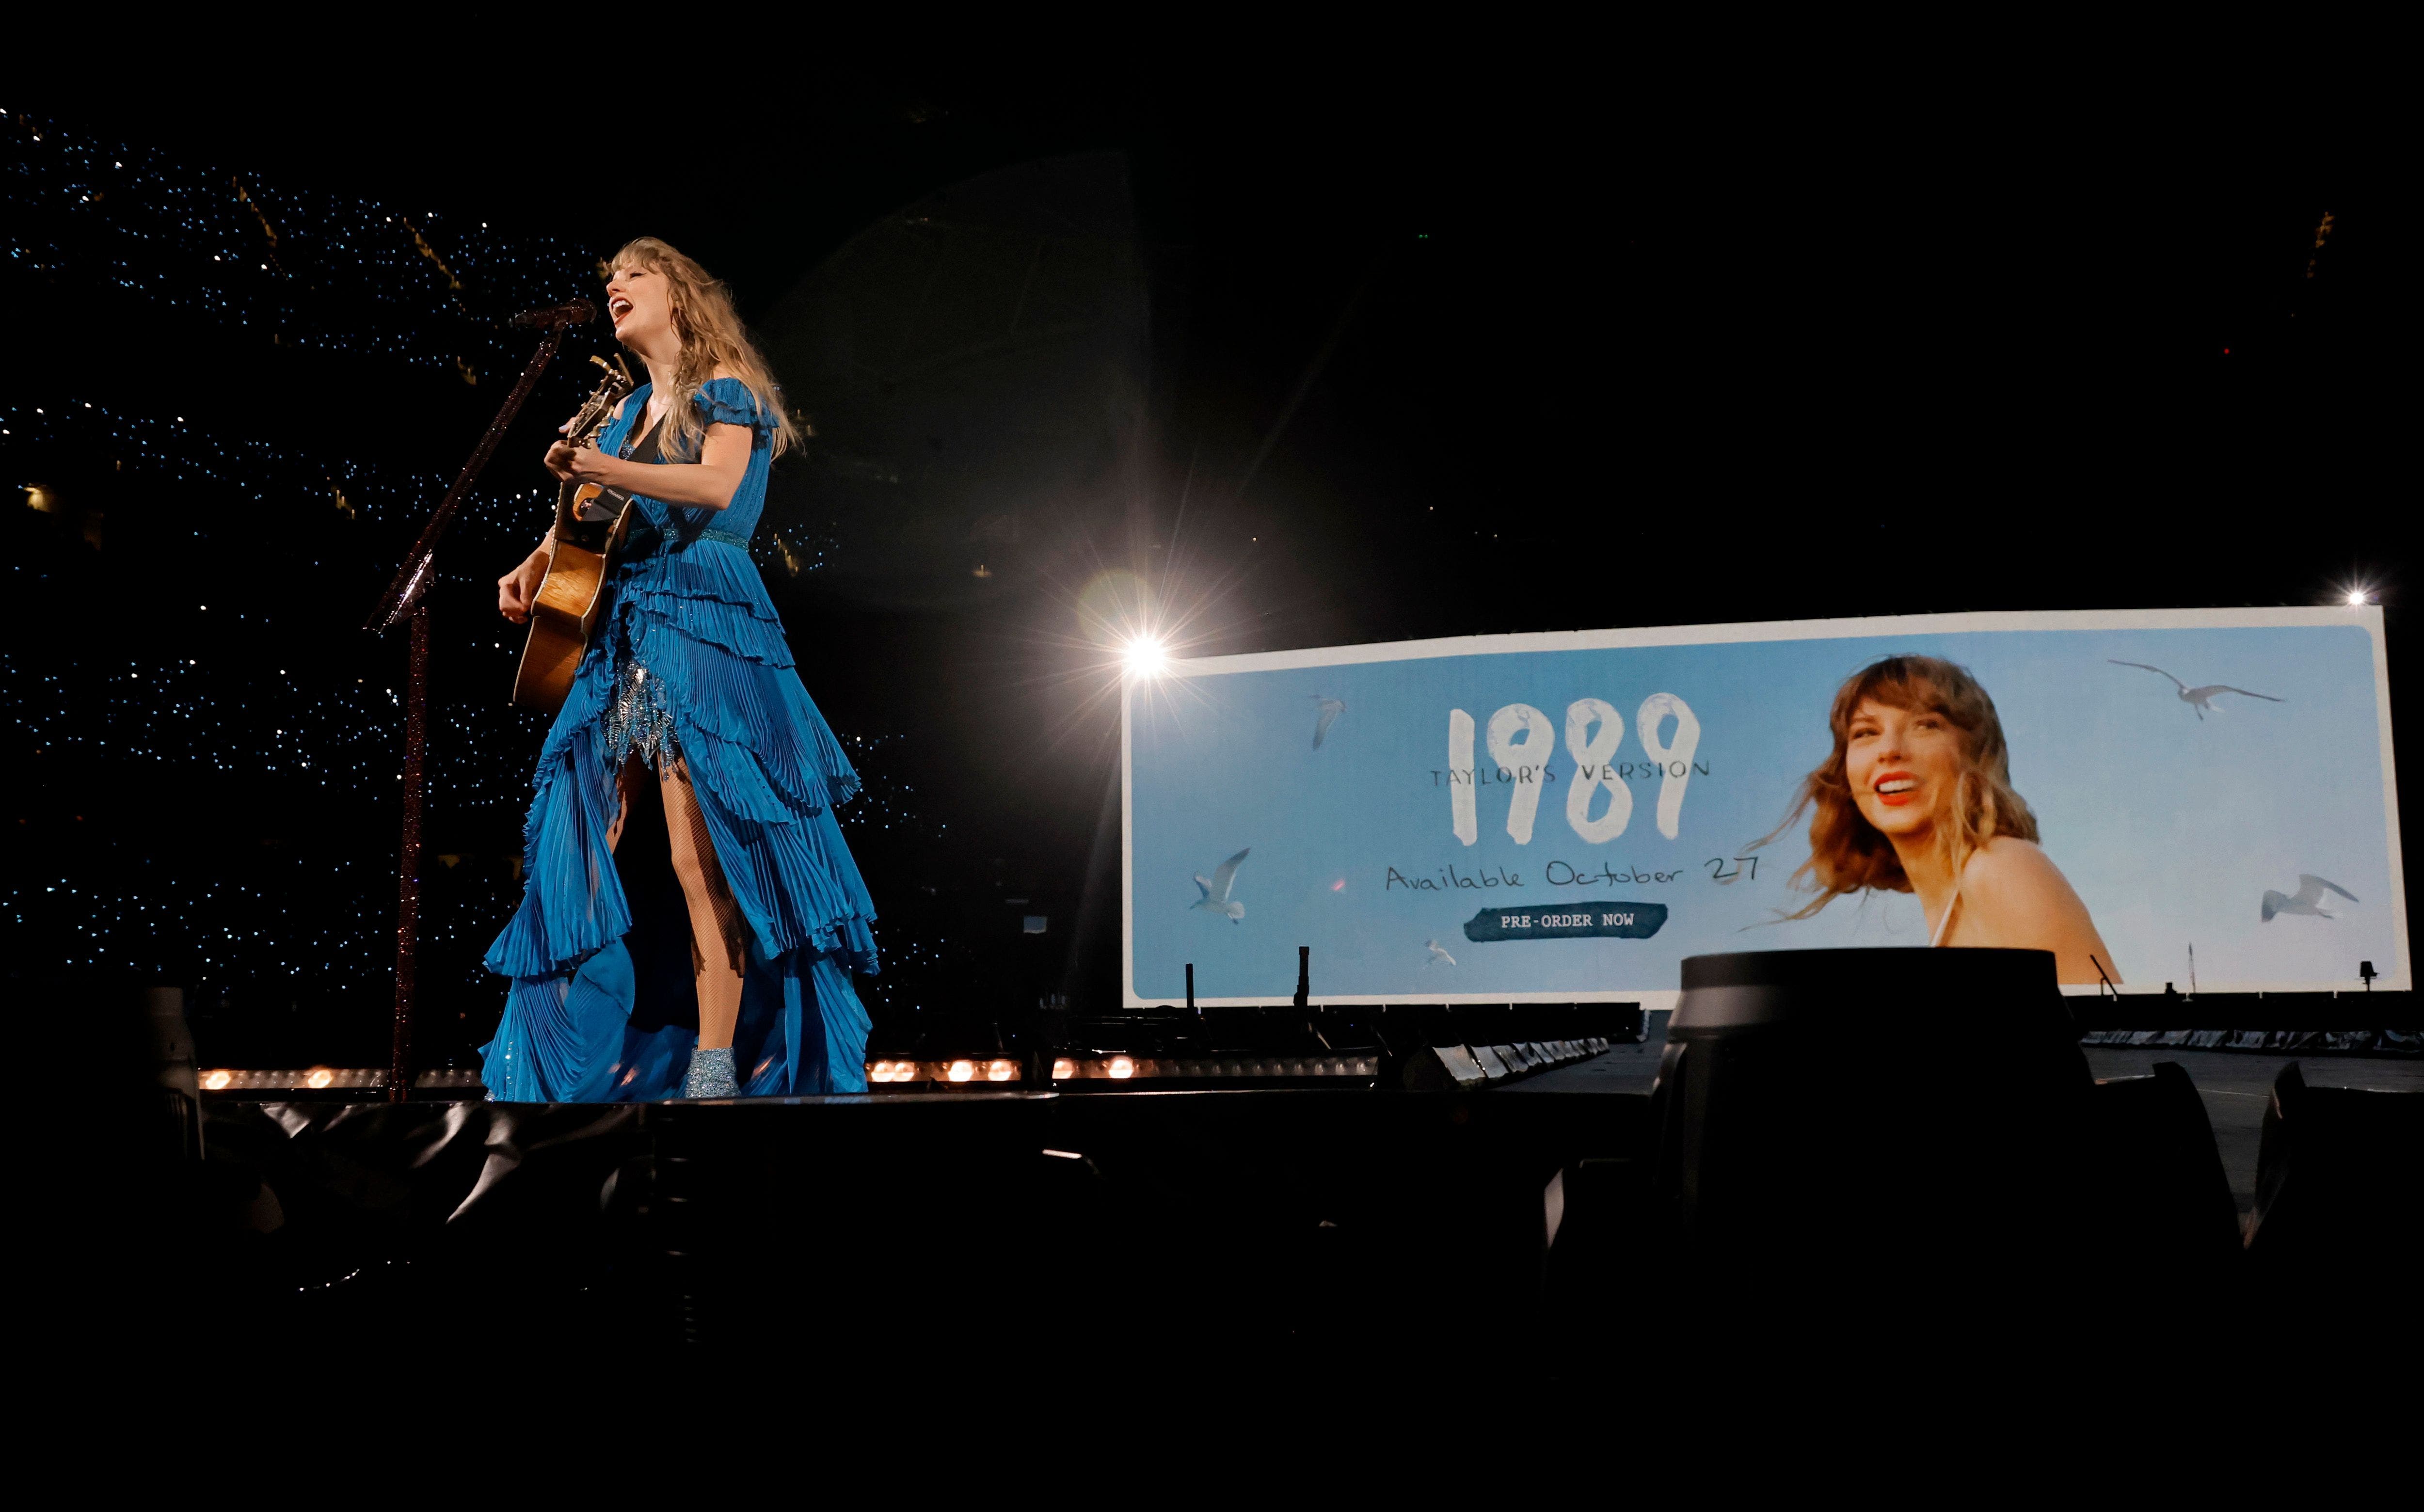 taylor-swift-announces-release-date-for-re-recorded-album-1989-taylor